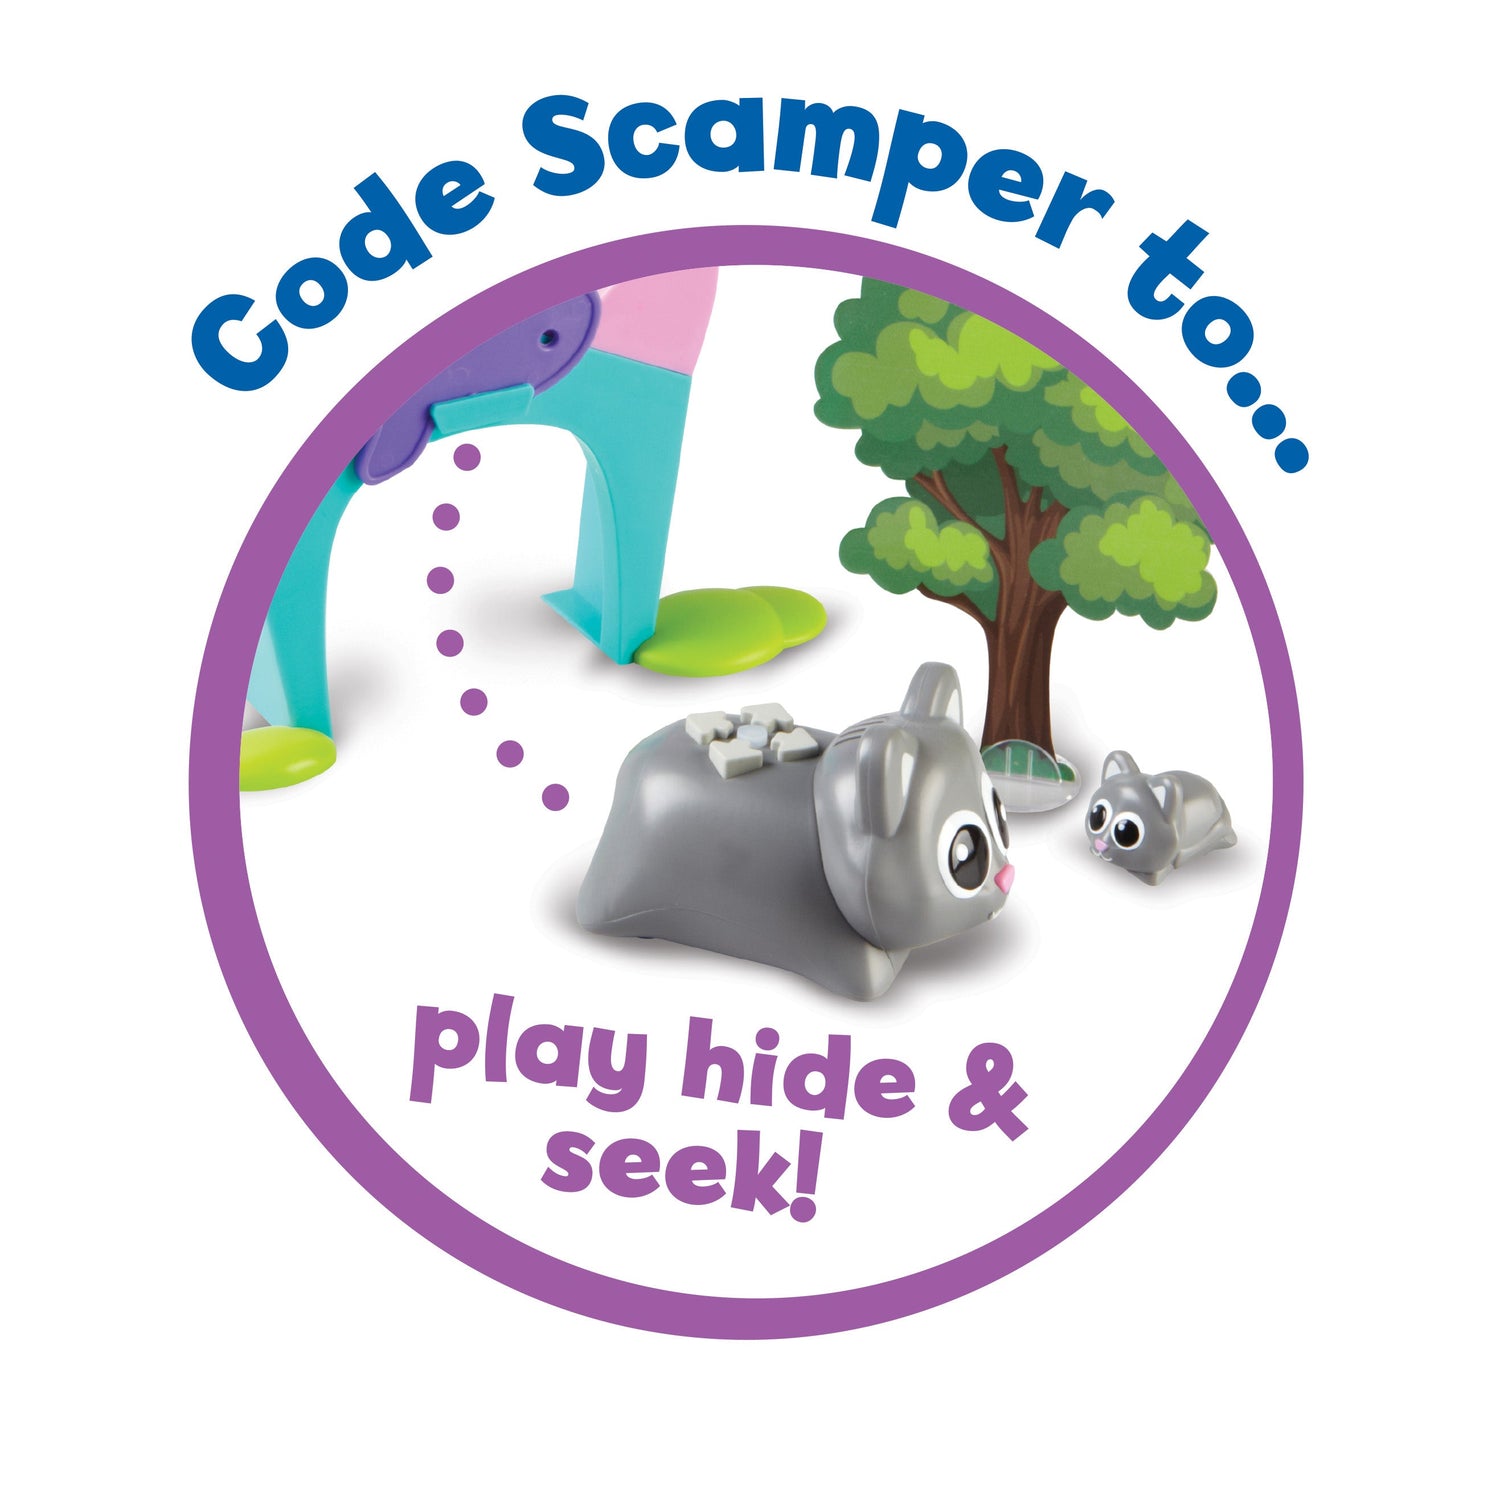 CODING CRITTERS® SCAMPER & SNEAKER by LEARNING RESOURCES - The Playful Collective